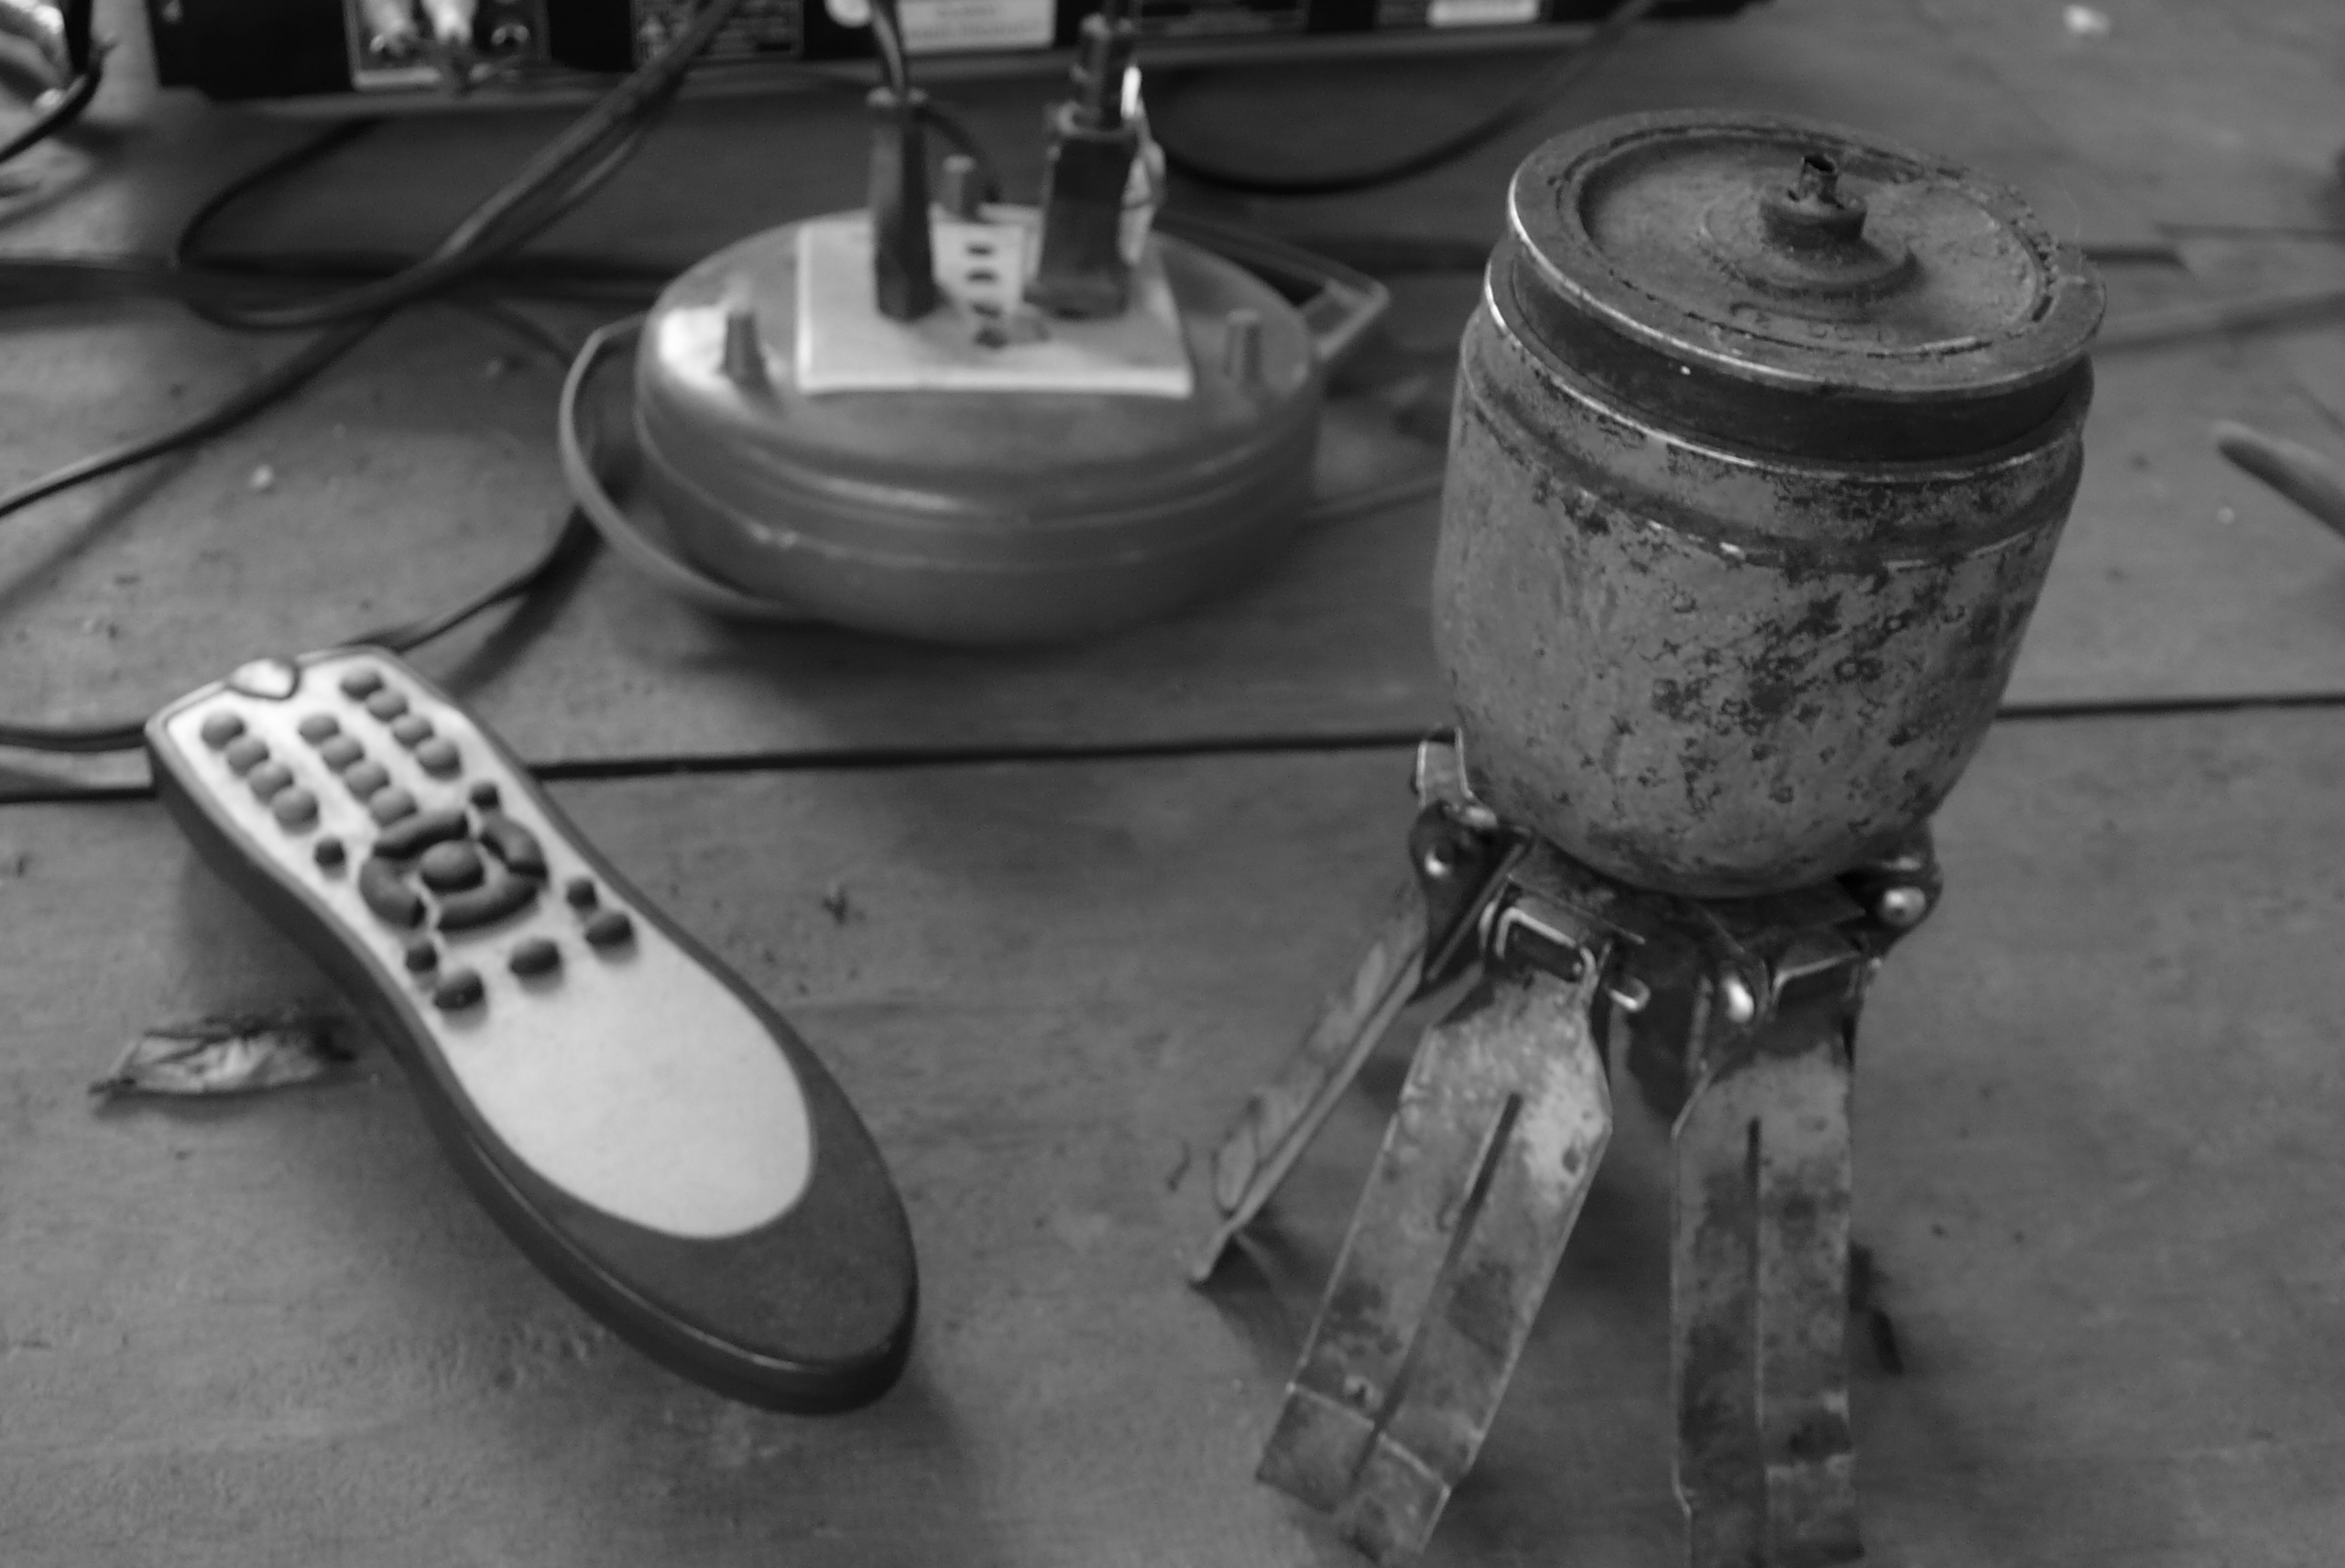 a cluster bomb being used as a lamp beside a DVD remote